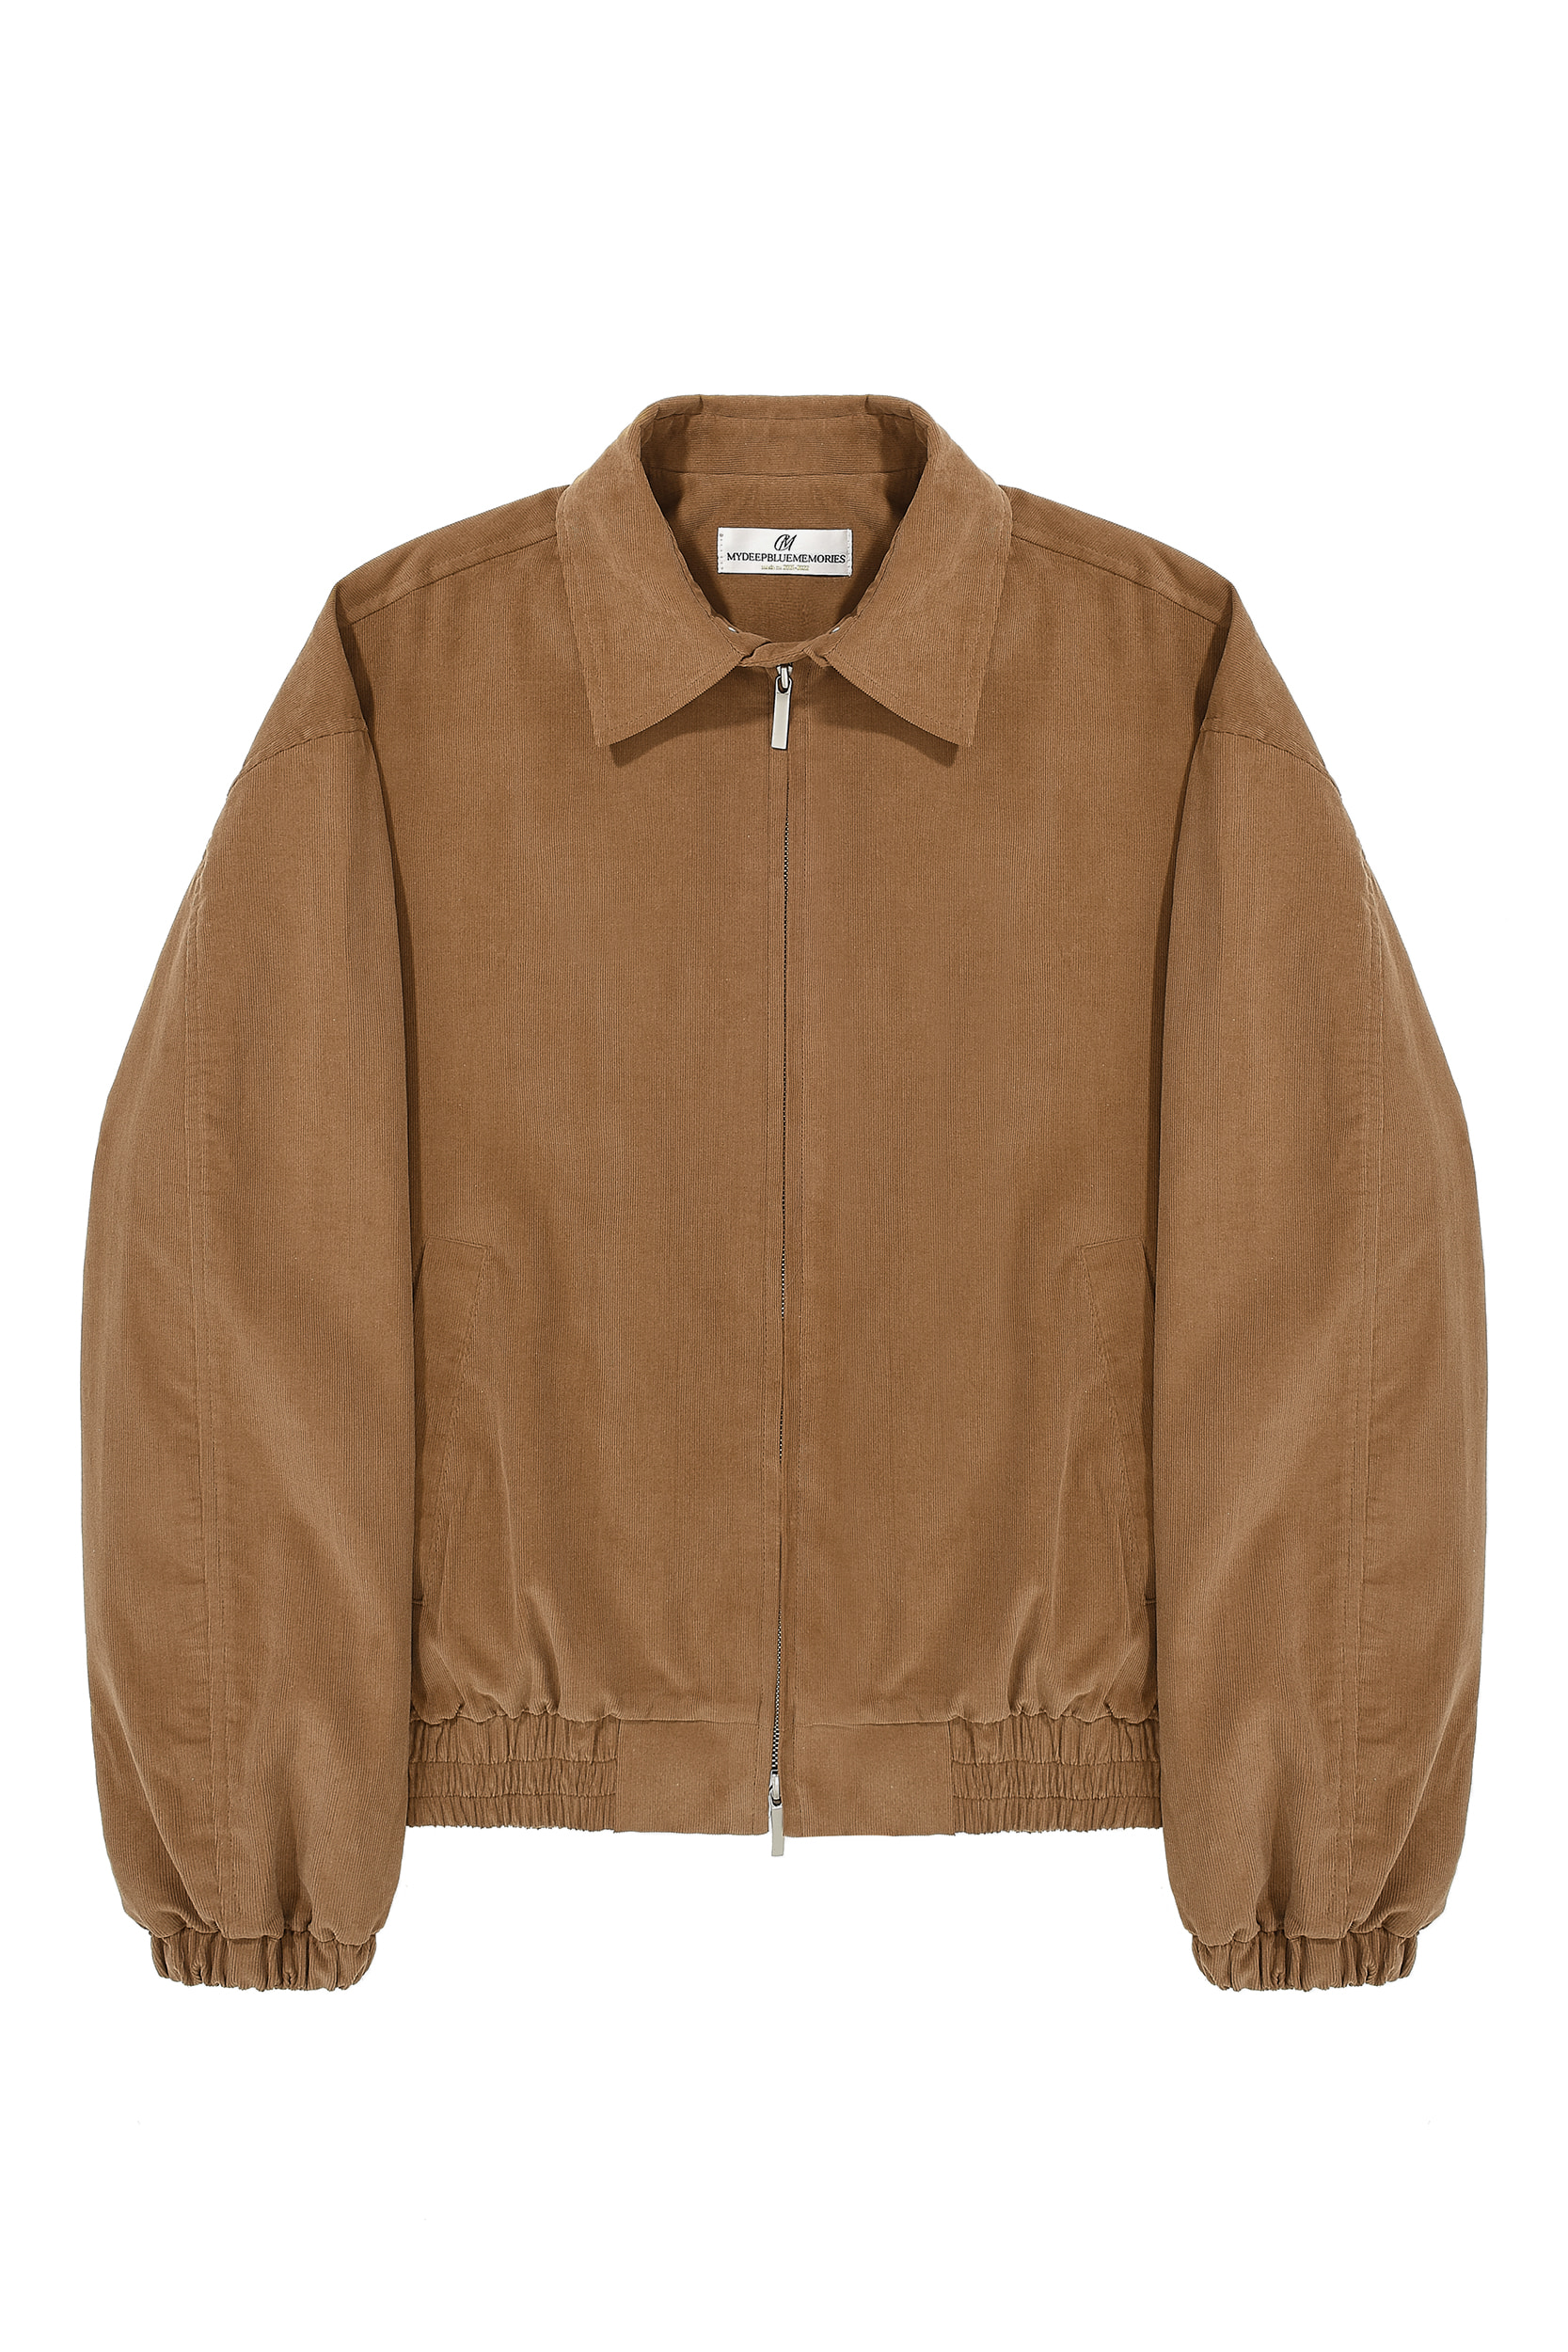 2way High Bomber Jacket in brown